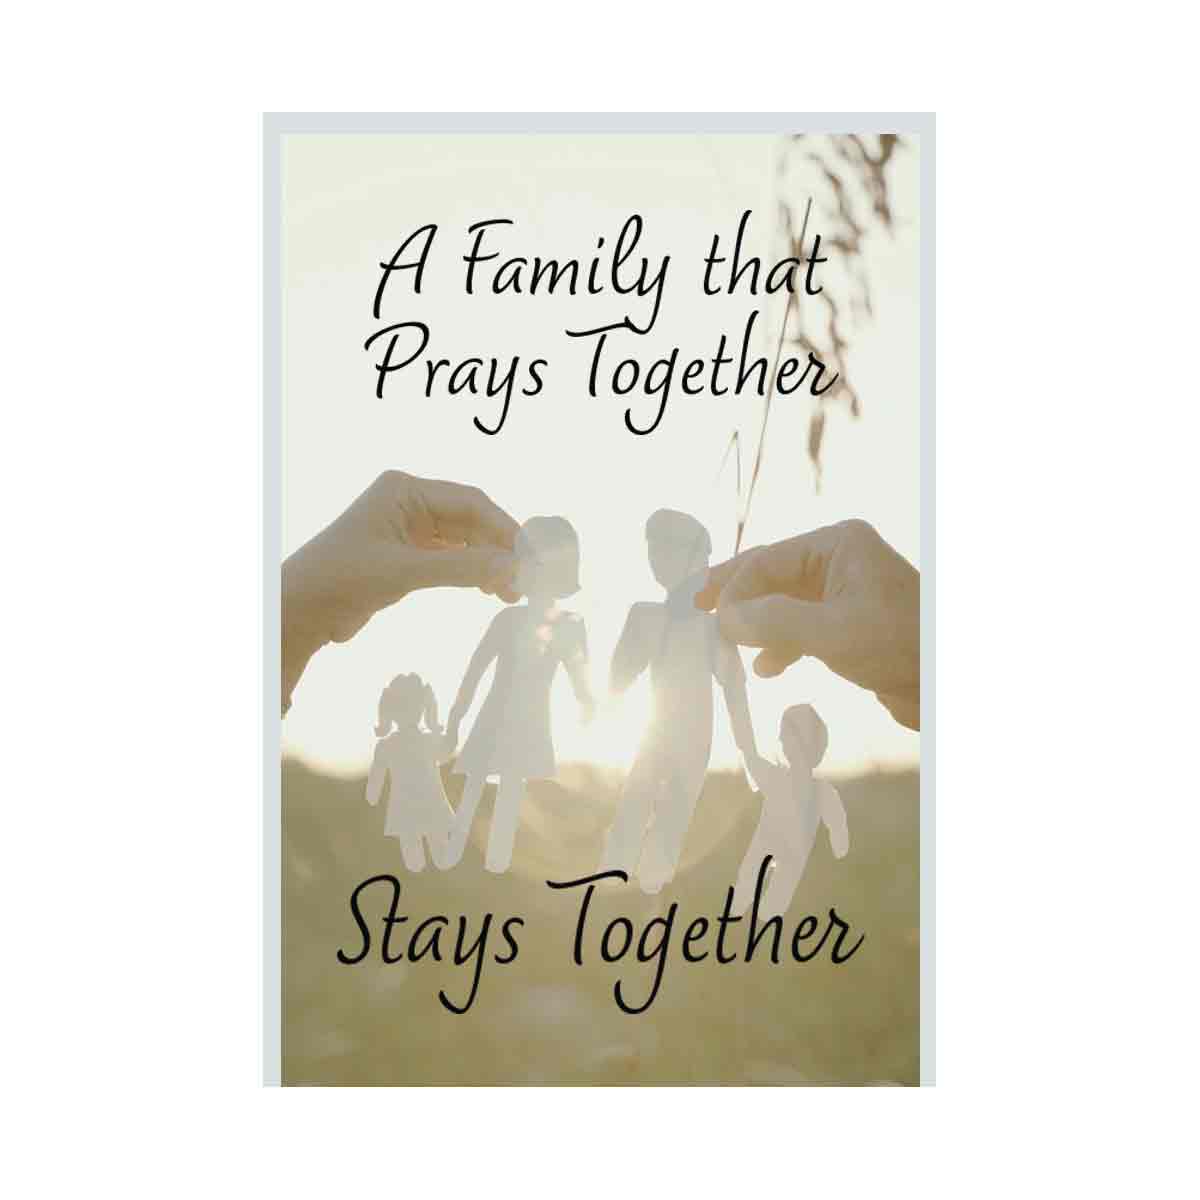 A Family that Prays together